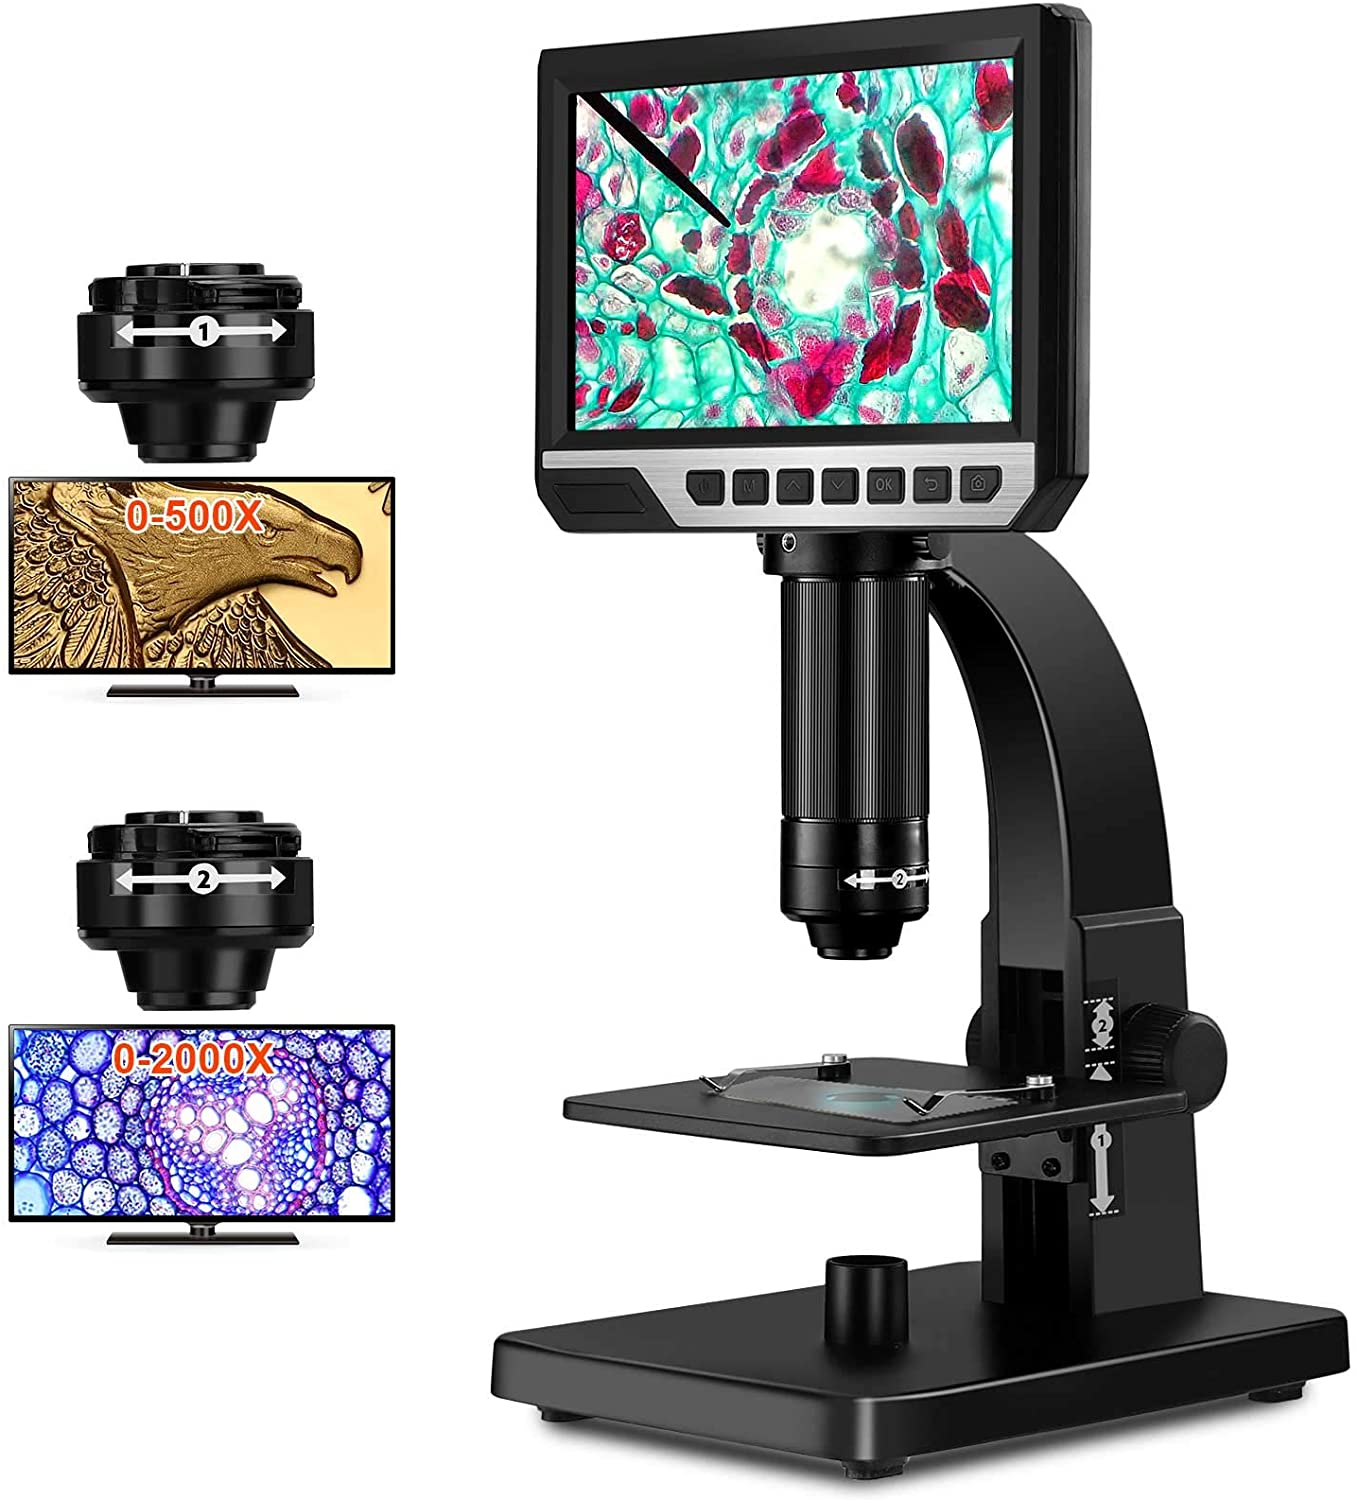 Elikliv 7" LCD Digital Microscope Dual Lens, Cell Microscope 2000X Magnification for Observing Cells Insect Plants, 12MP USB Microscope Camera Video for Coin PCB Circuit Repair Soldering